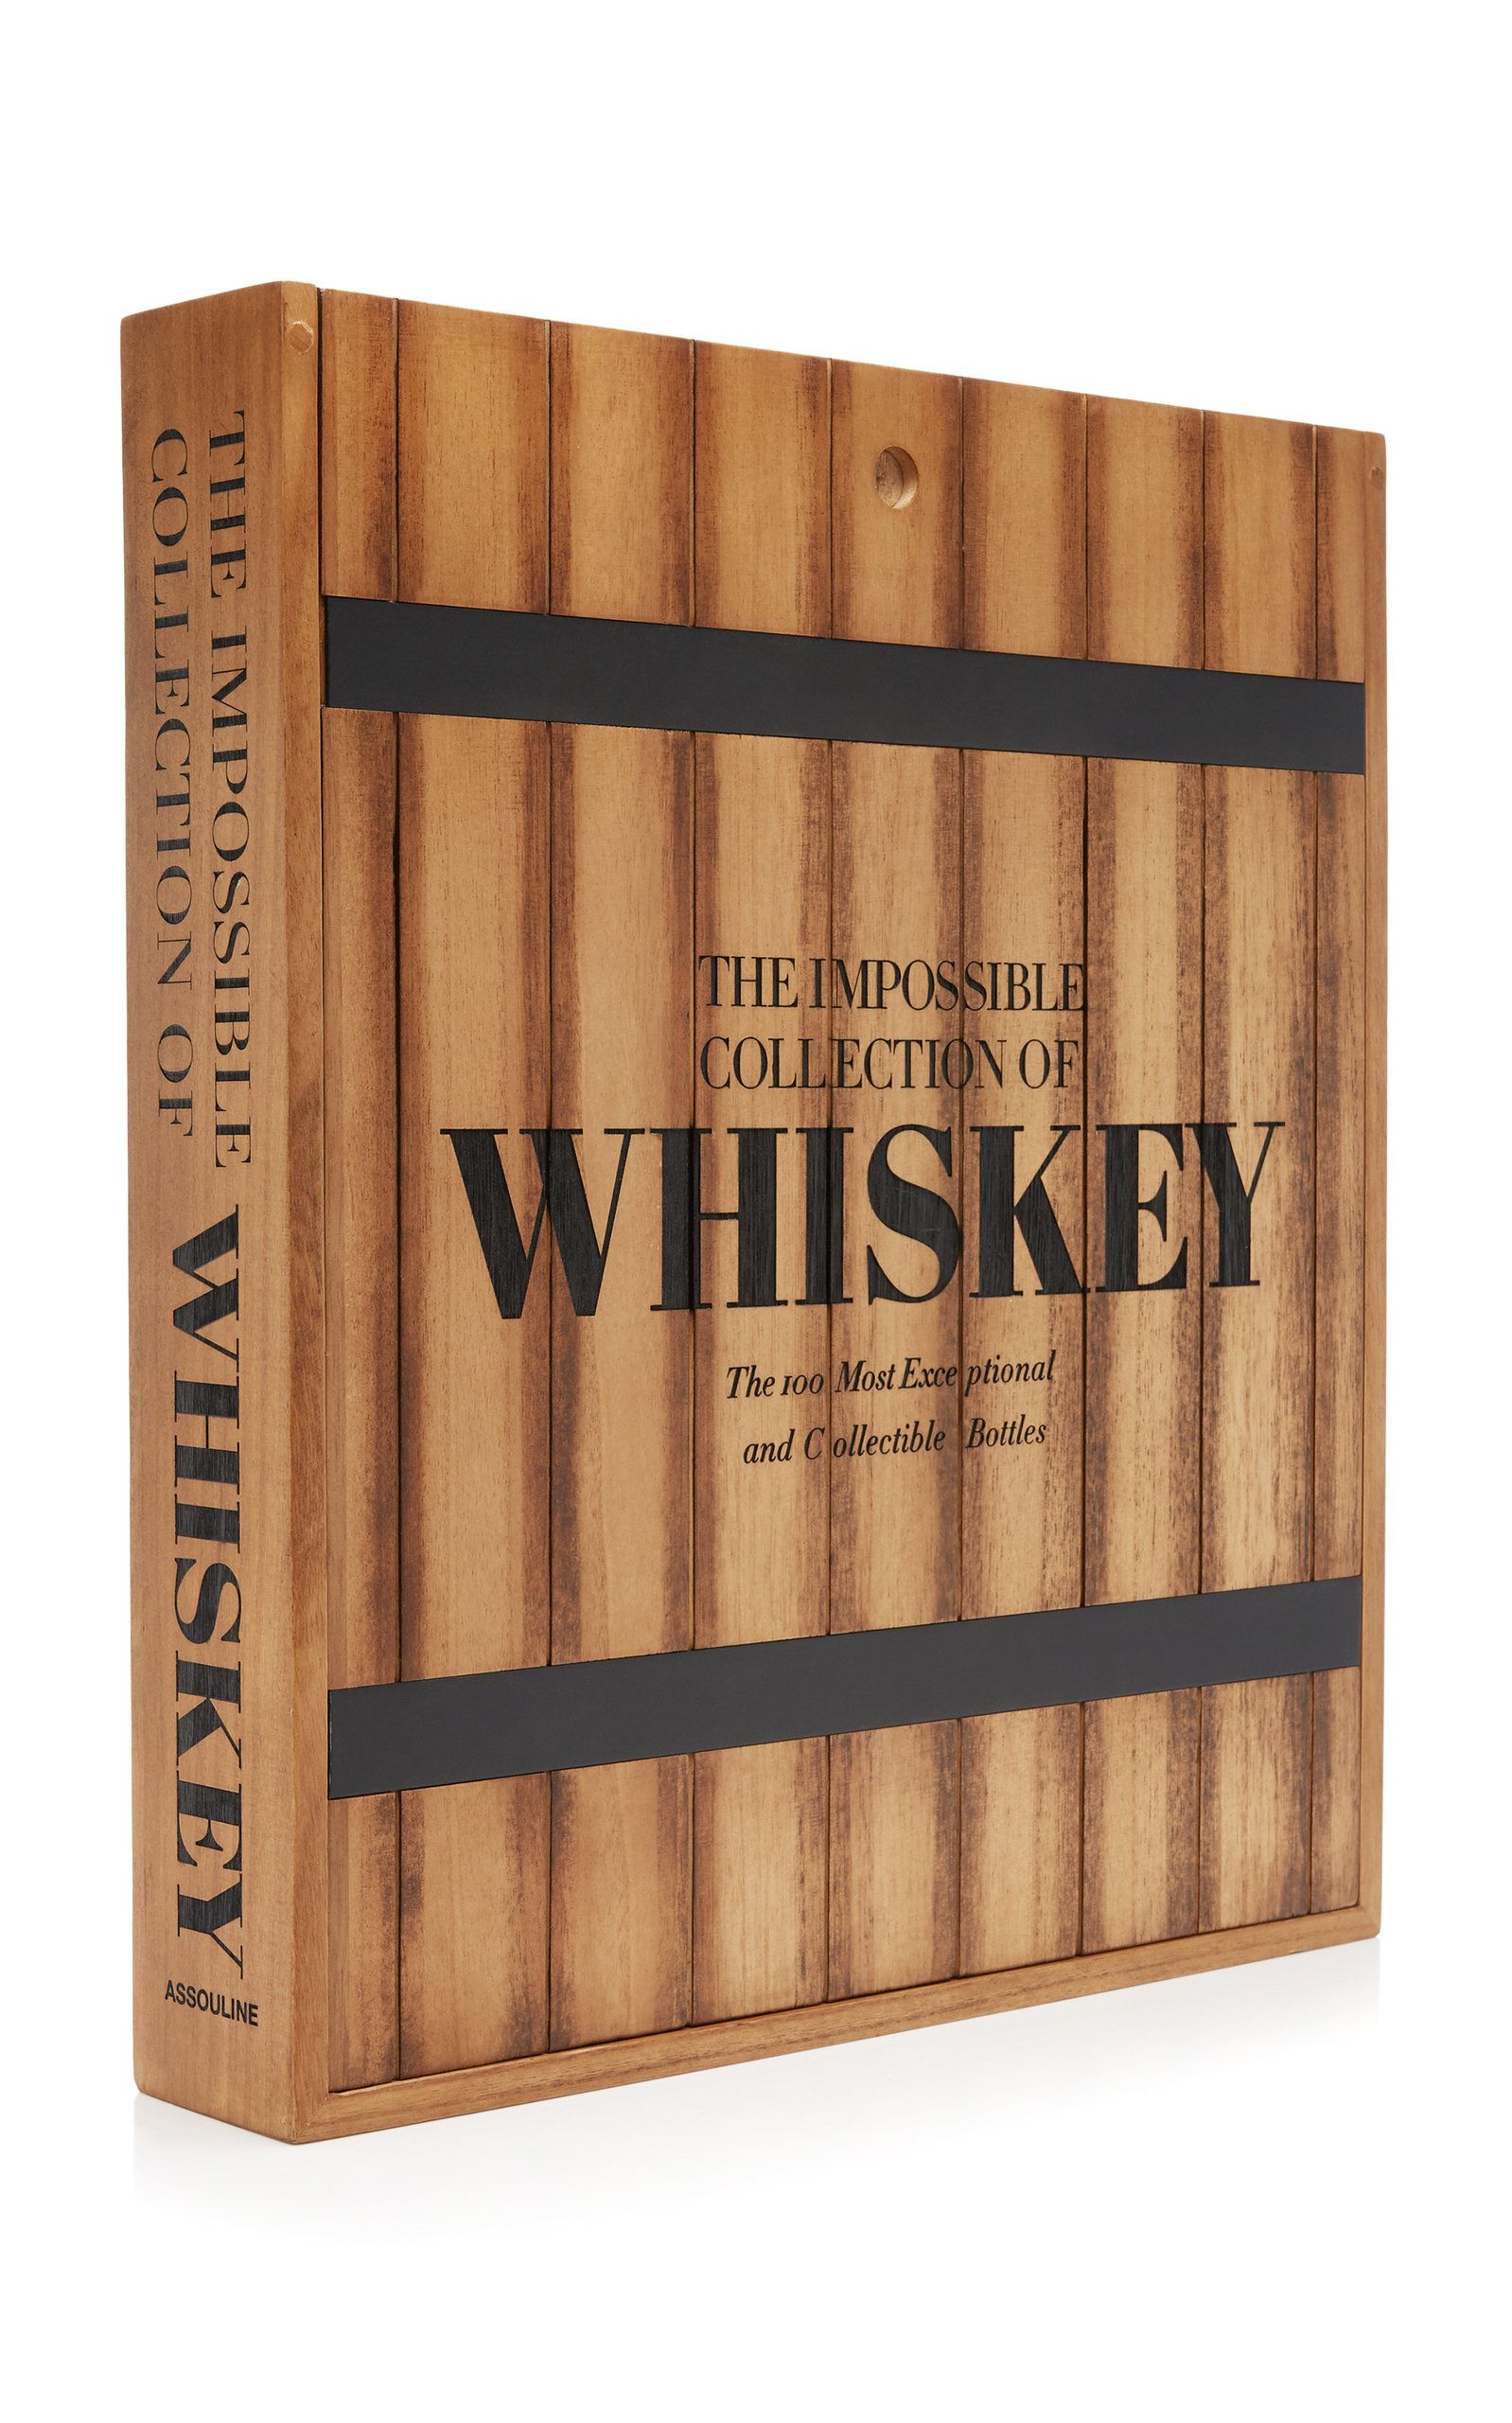 Assouline - The Impossible Collection of Whiskey Hardcover Book - Color: Multi - Material: Paper - M | Moda Operandi (Global)